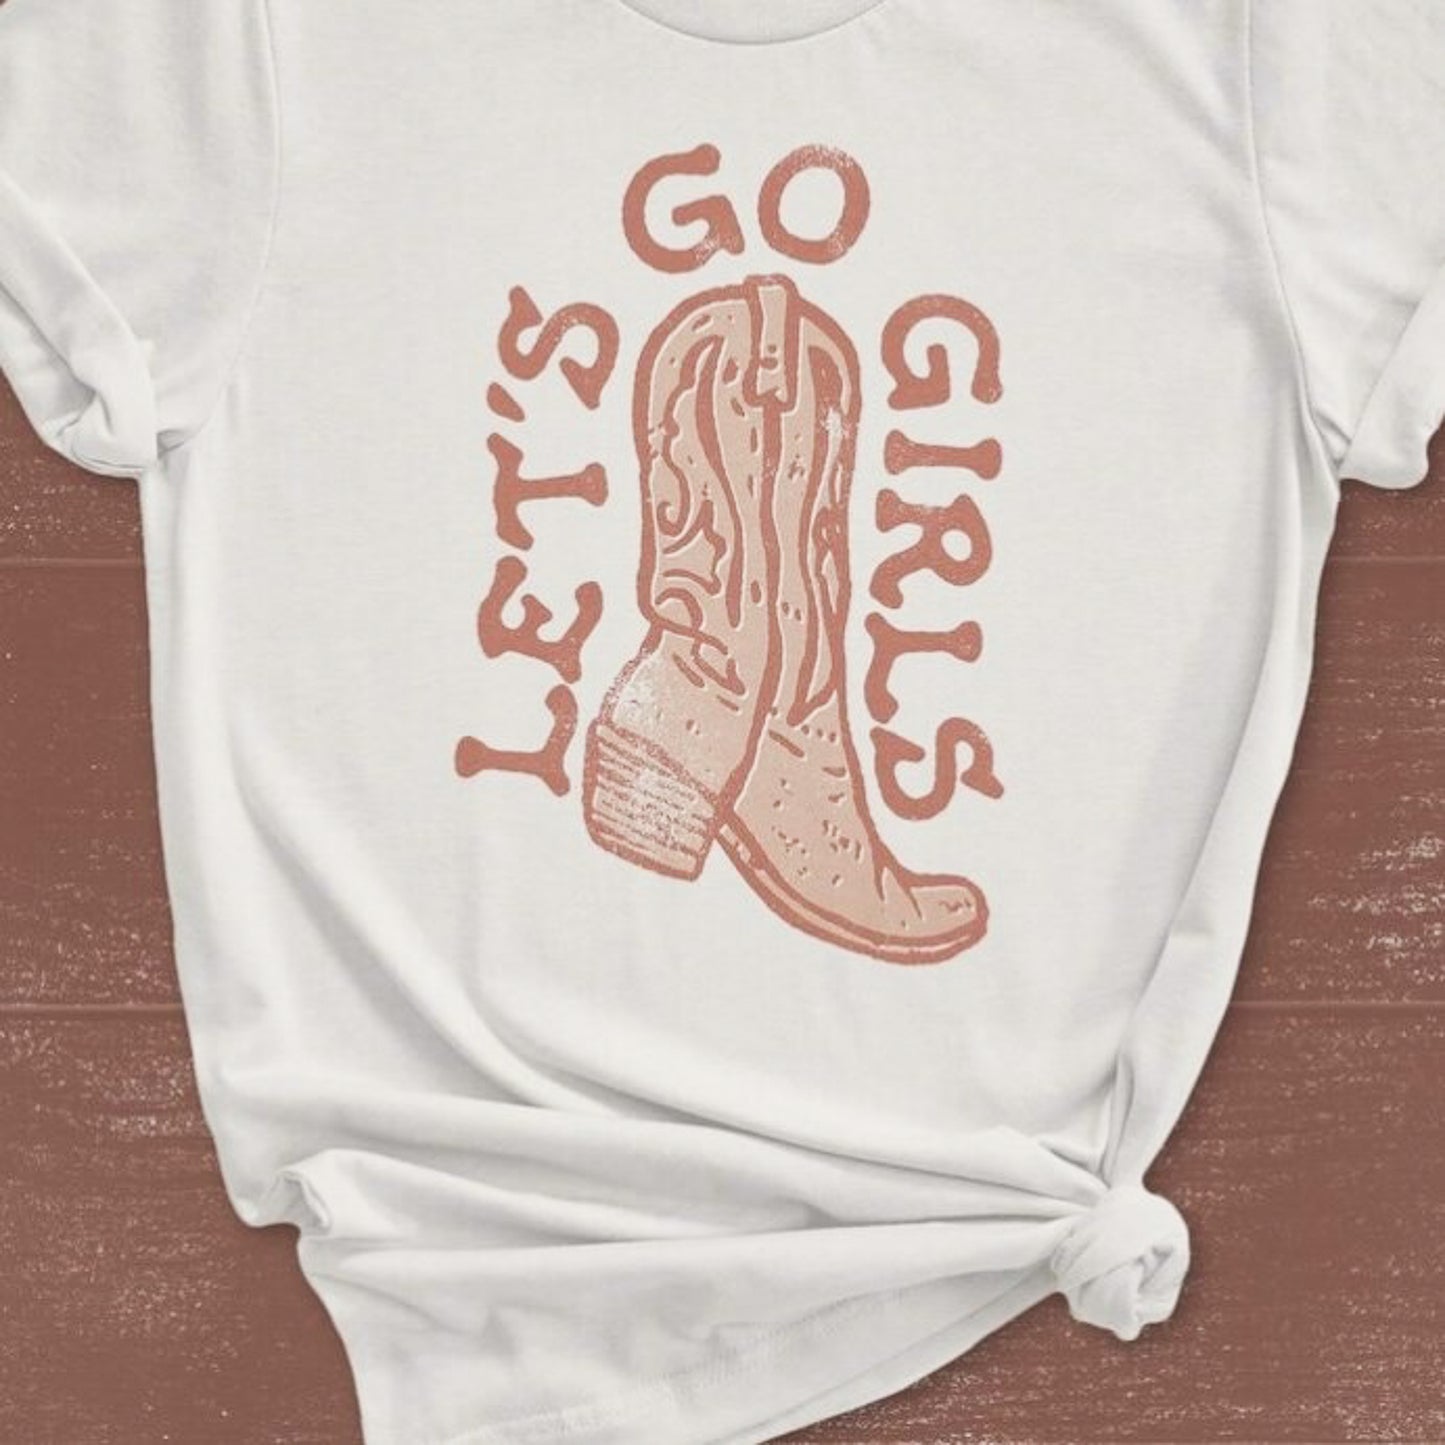 Let's Go Girls With Cowboy Boots Tee